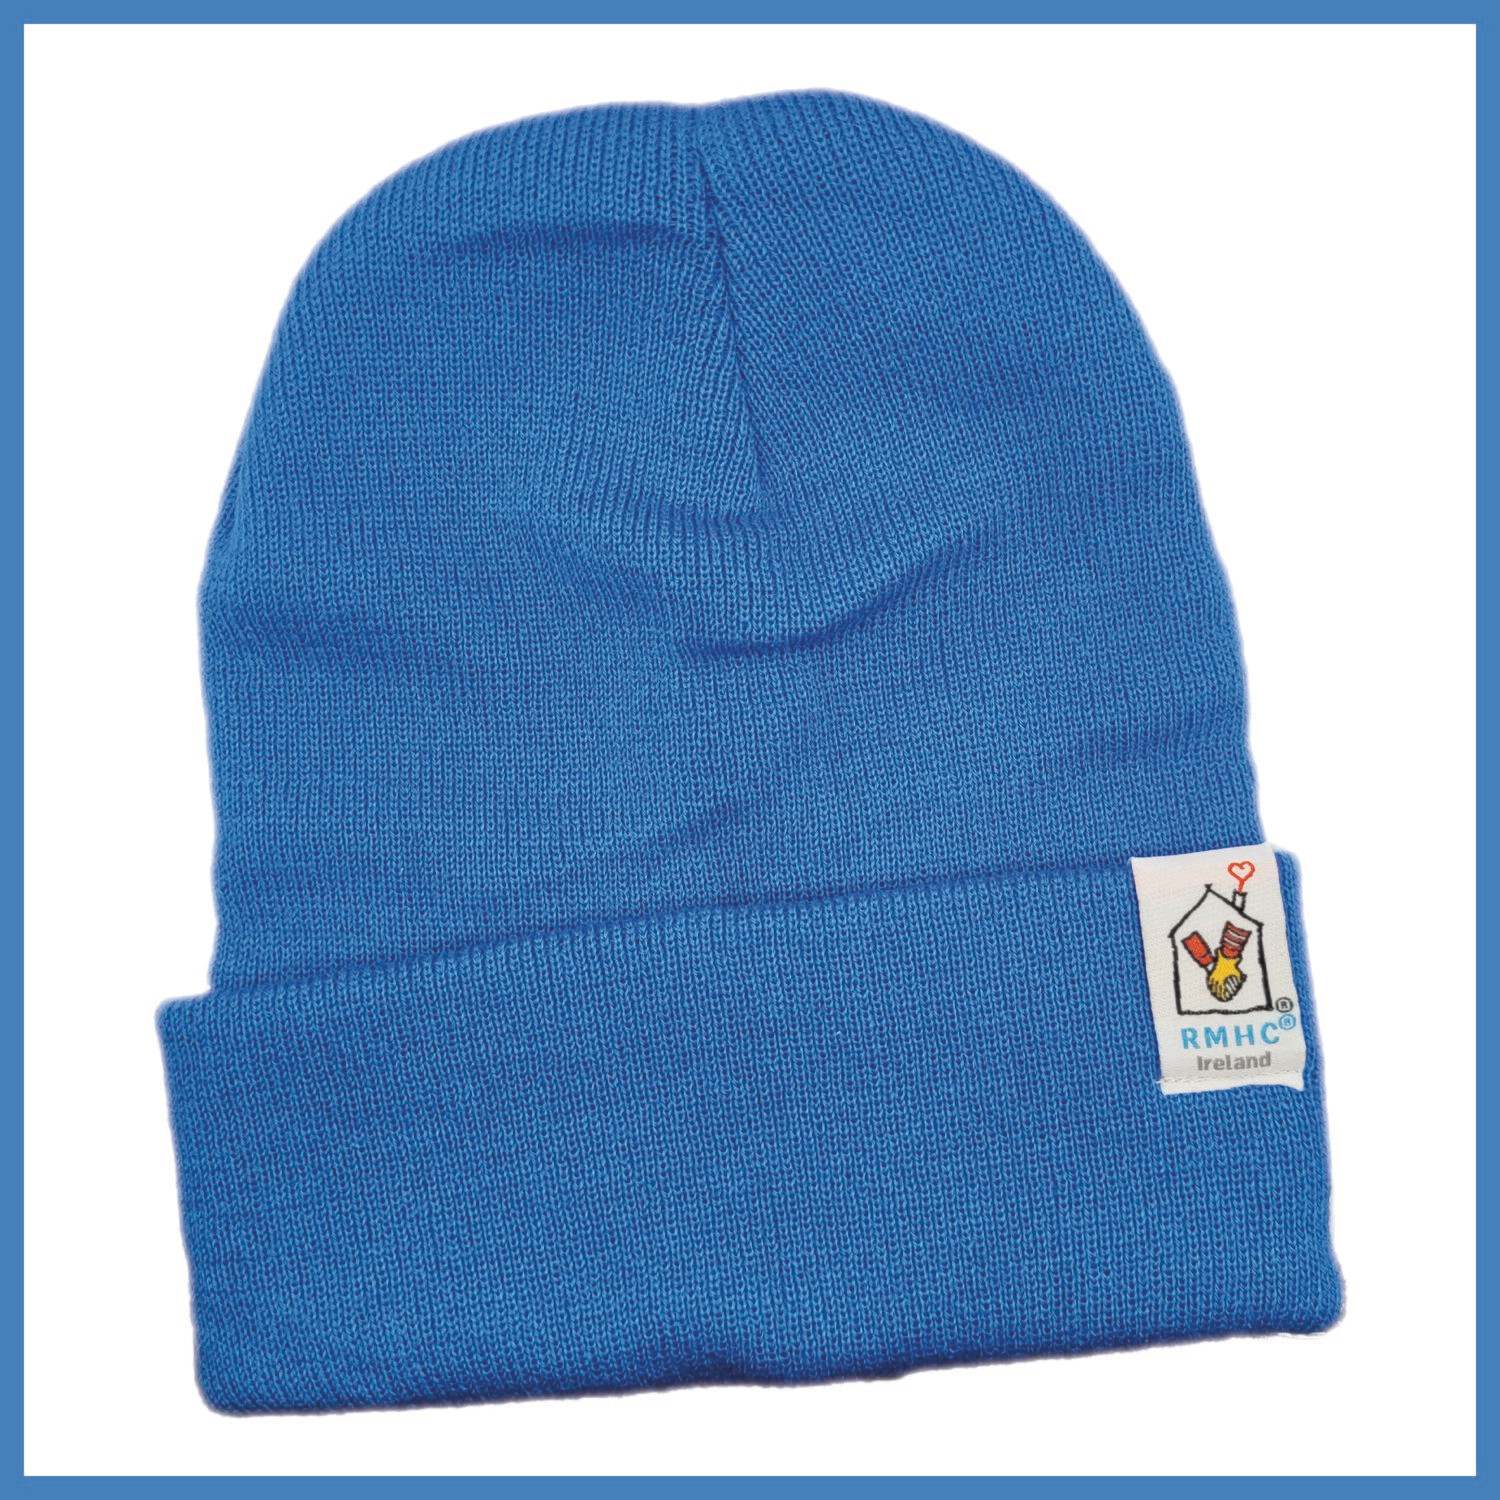 Branded Beanie- Adult Size